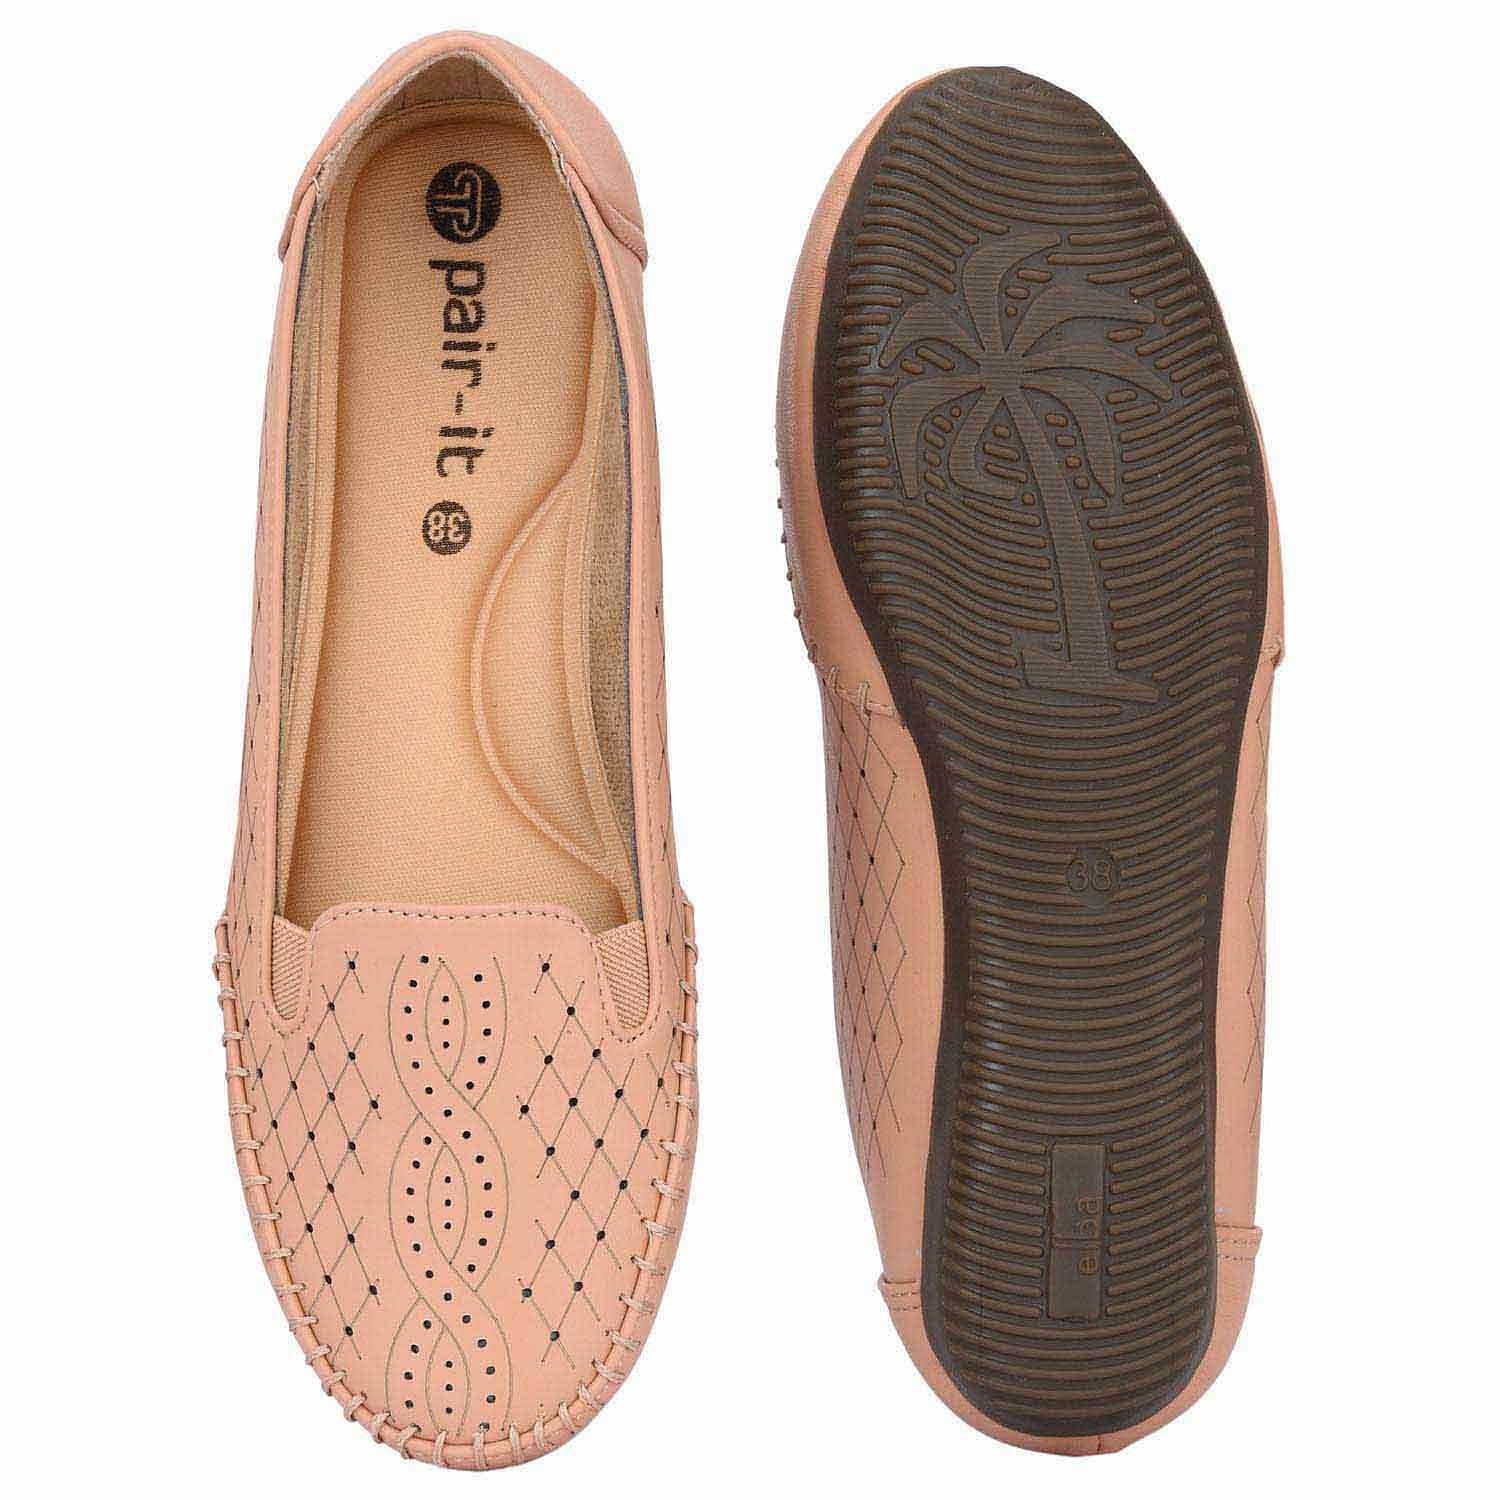 Pair-it Wmn Formal Belly-IMP-WMN-Loafers-216-Peach